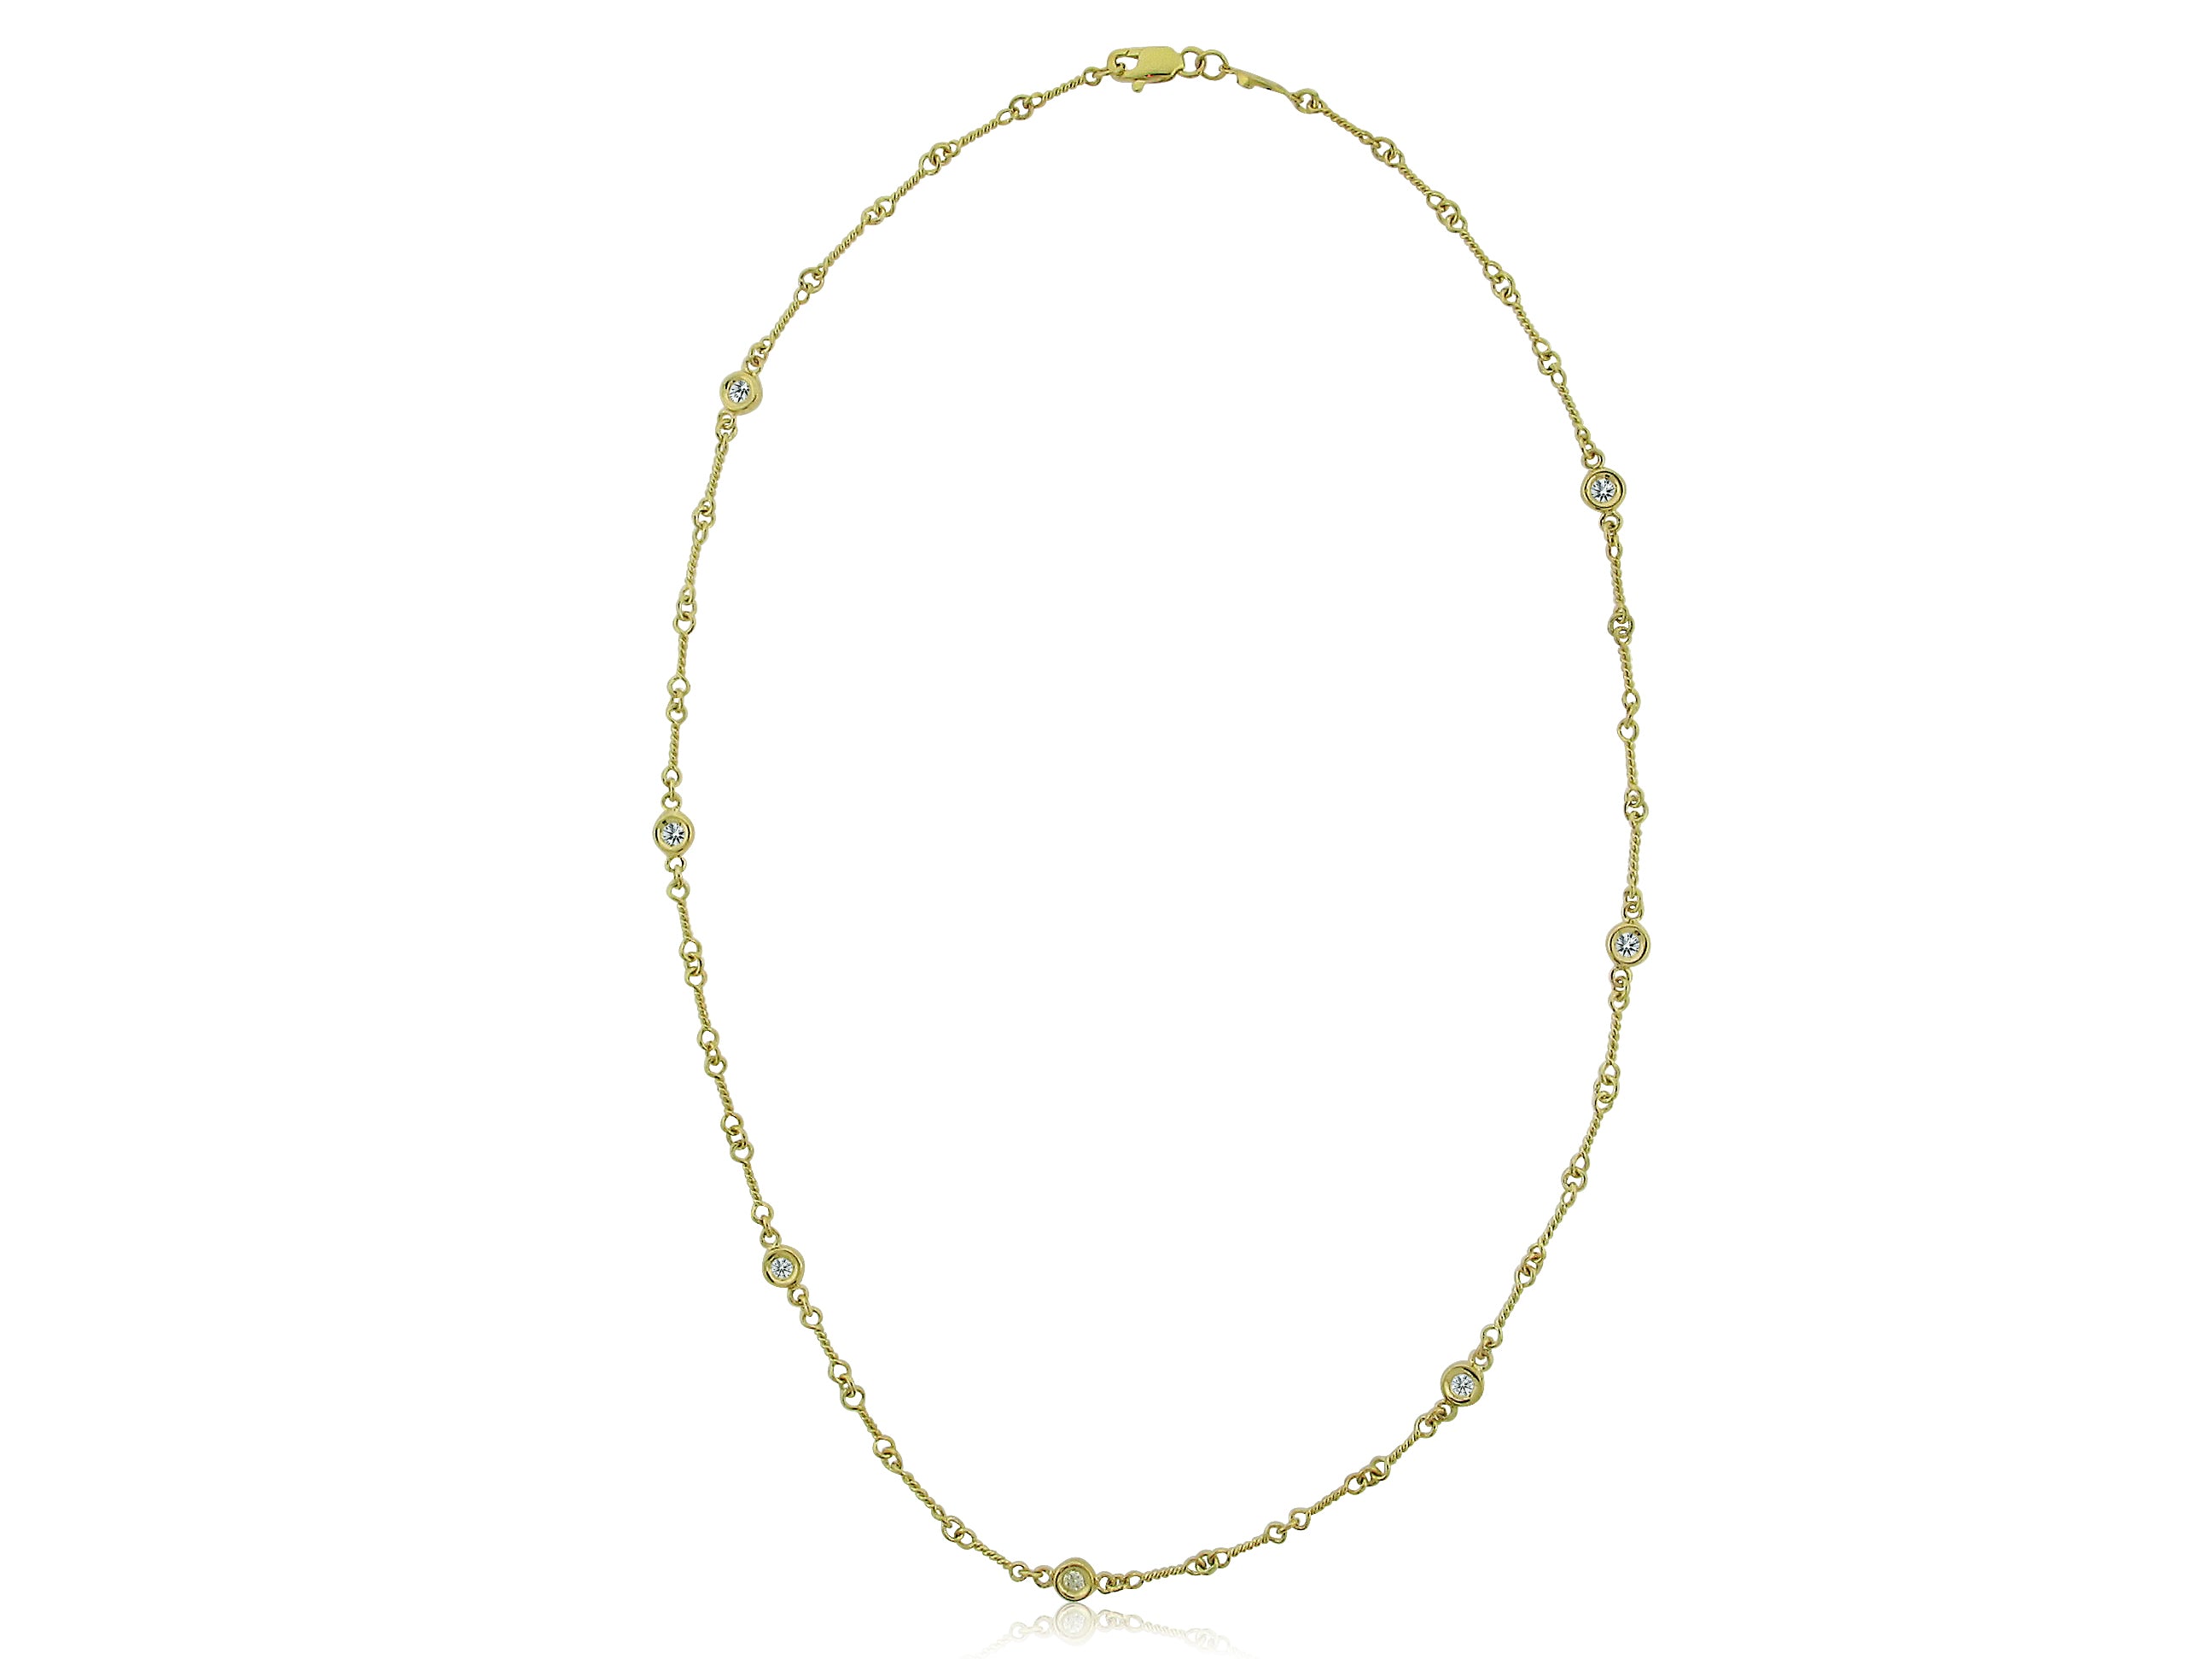 ROBERTO COIN 18K YELLOW GOLD 0.28CT SI/G DIAMOND STATION NECKLACE ON A DOG BONE CHAIN FROM THE DIAMONDS BY THE INCH COLLECTION